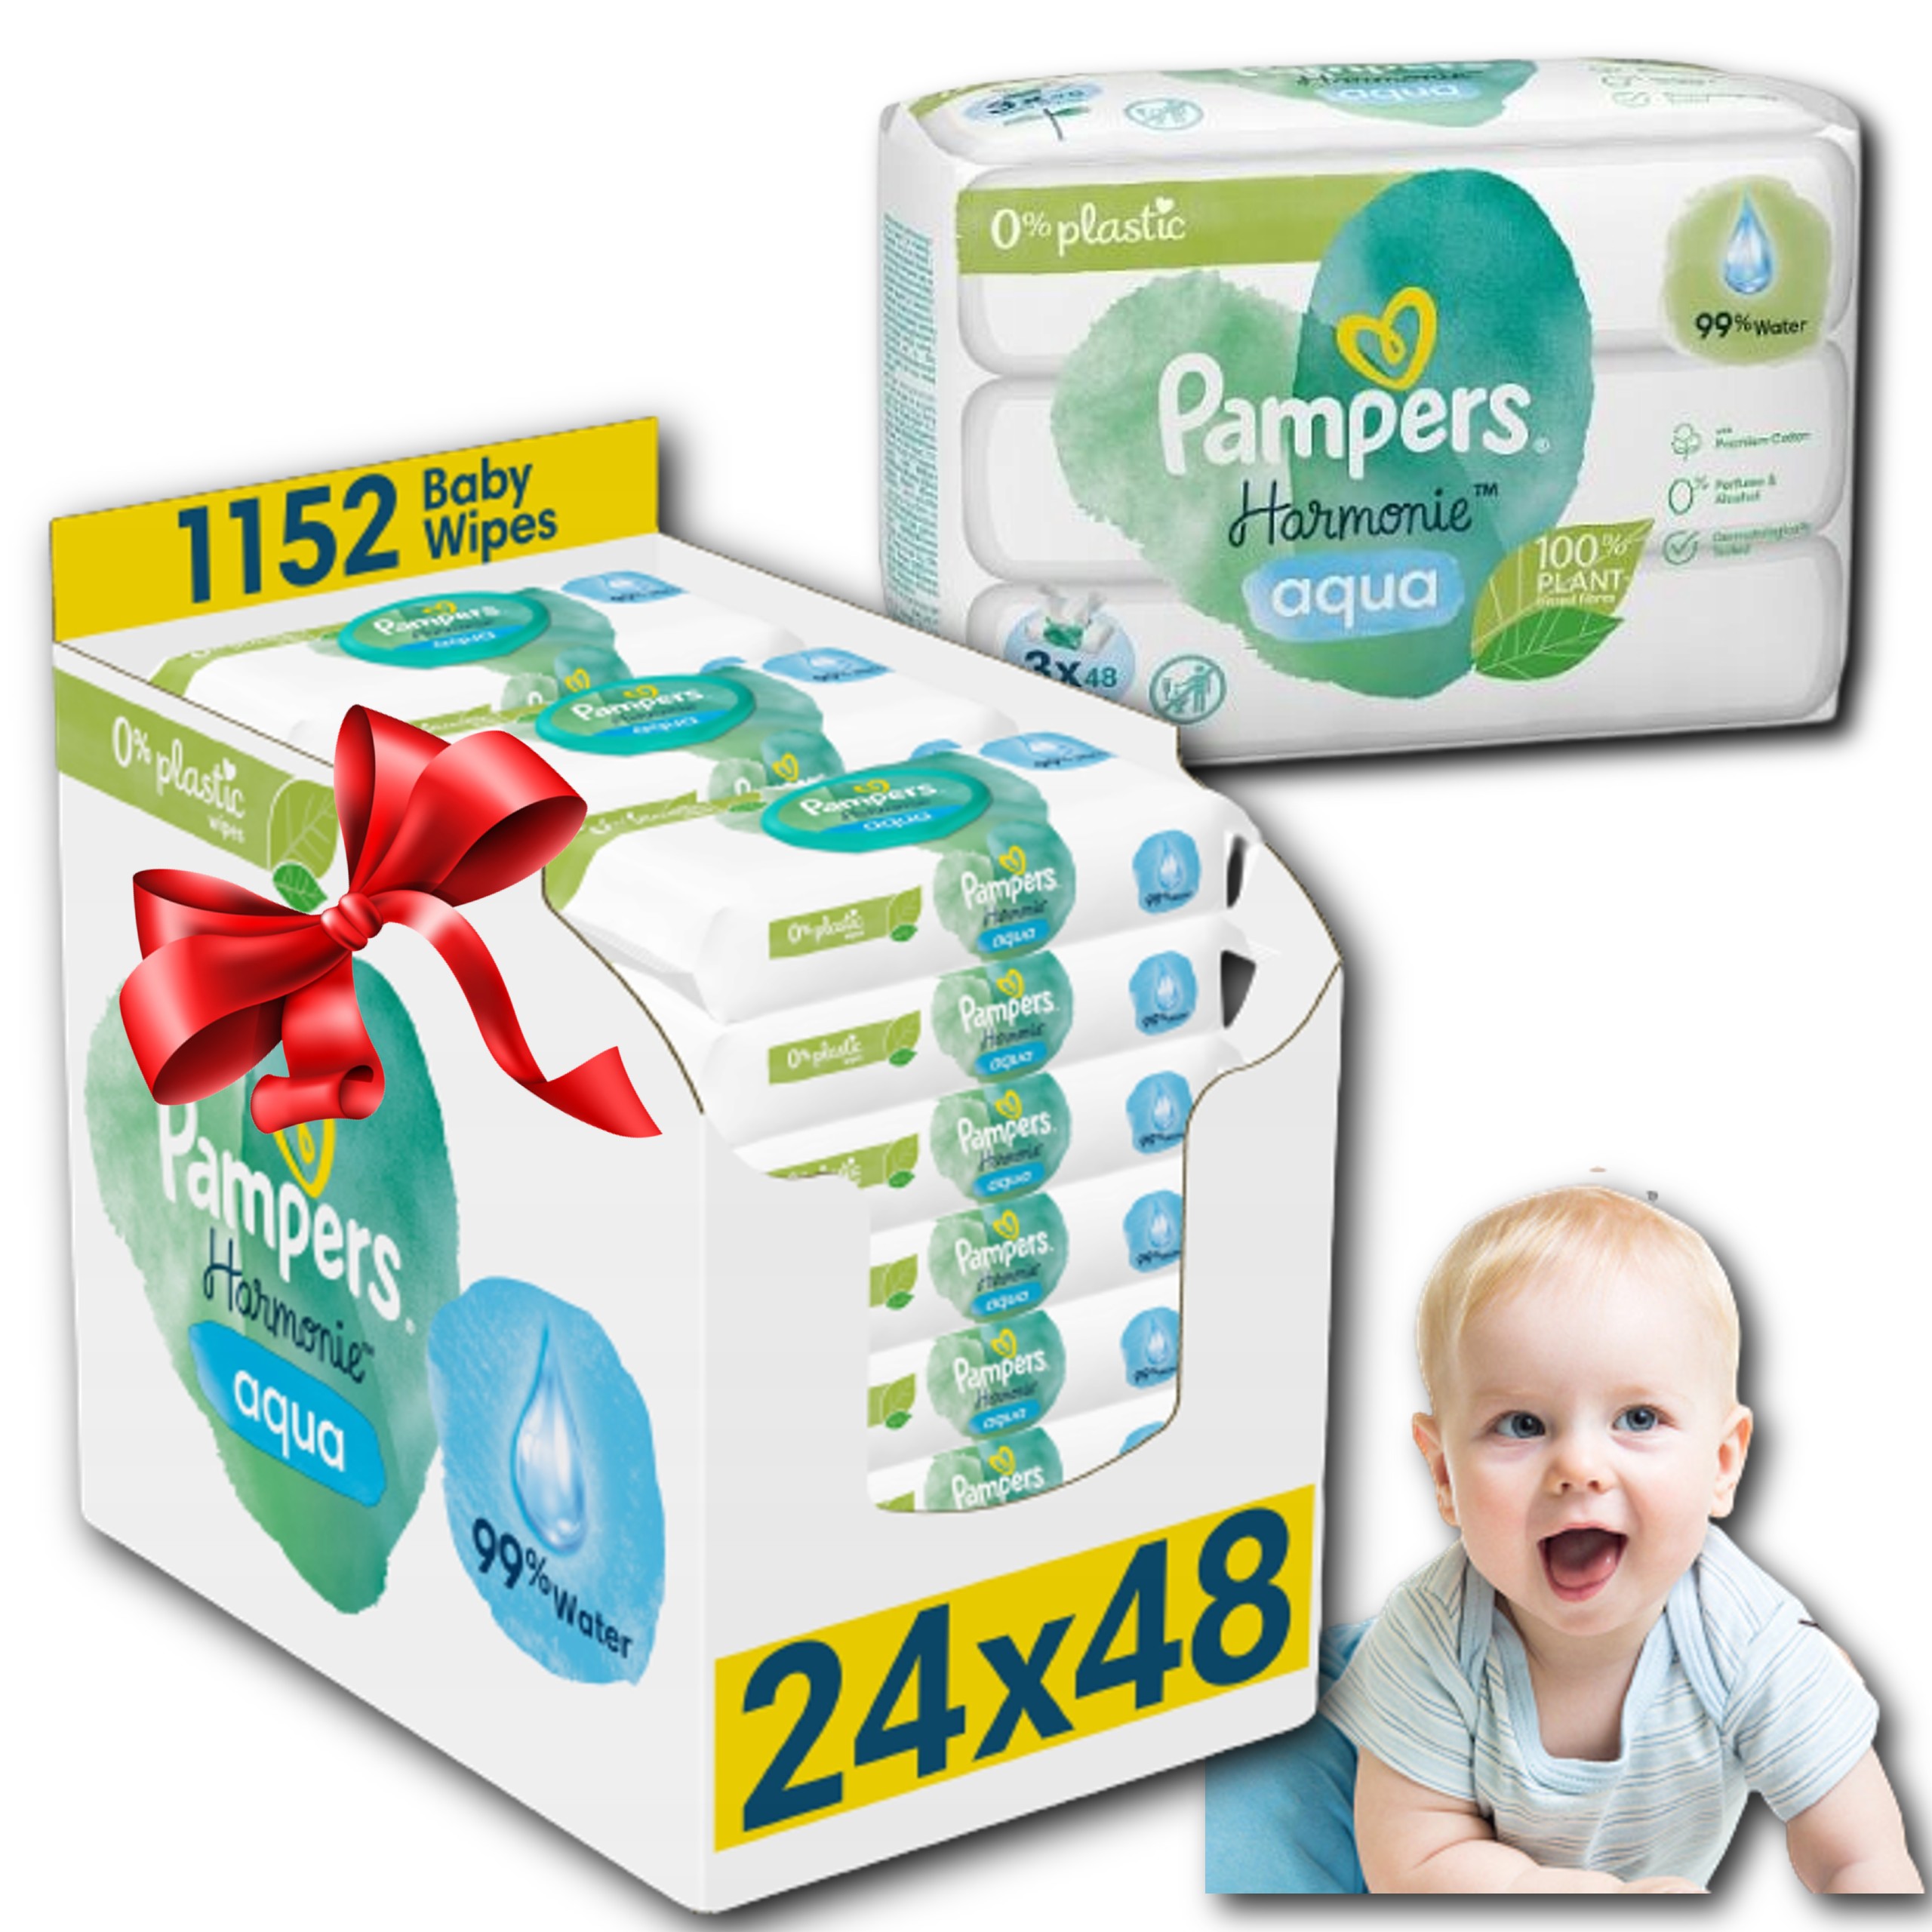 pampers active baby pieluchy rozmiar 6 extra large